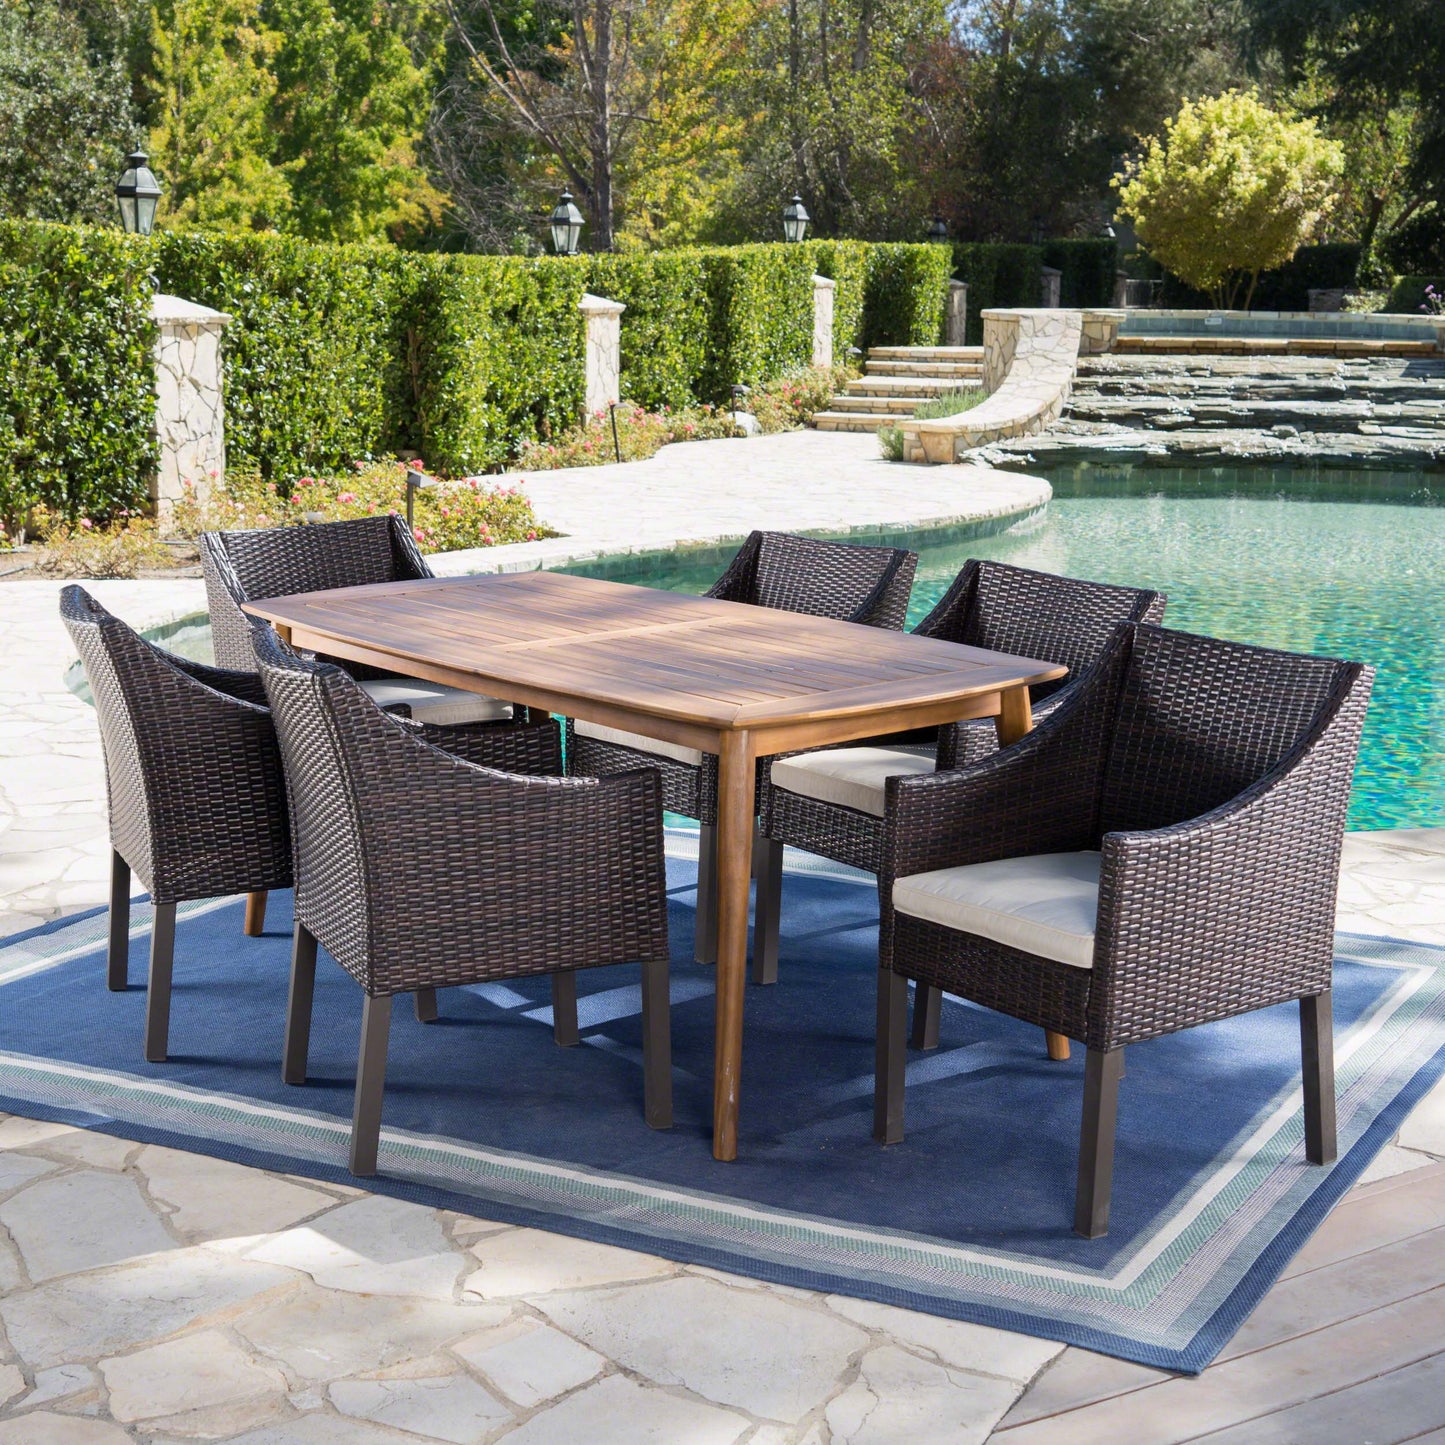 Kerk Outdoor 7 Piece Wicker Dining Set with Teak Finished Acacia Wood Table